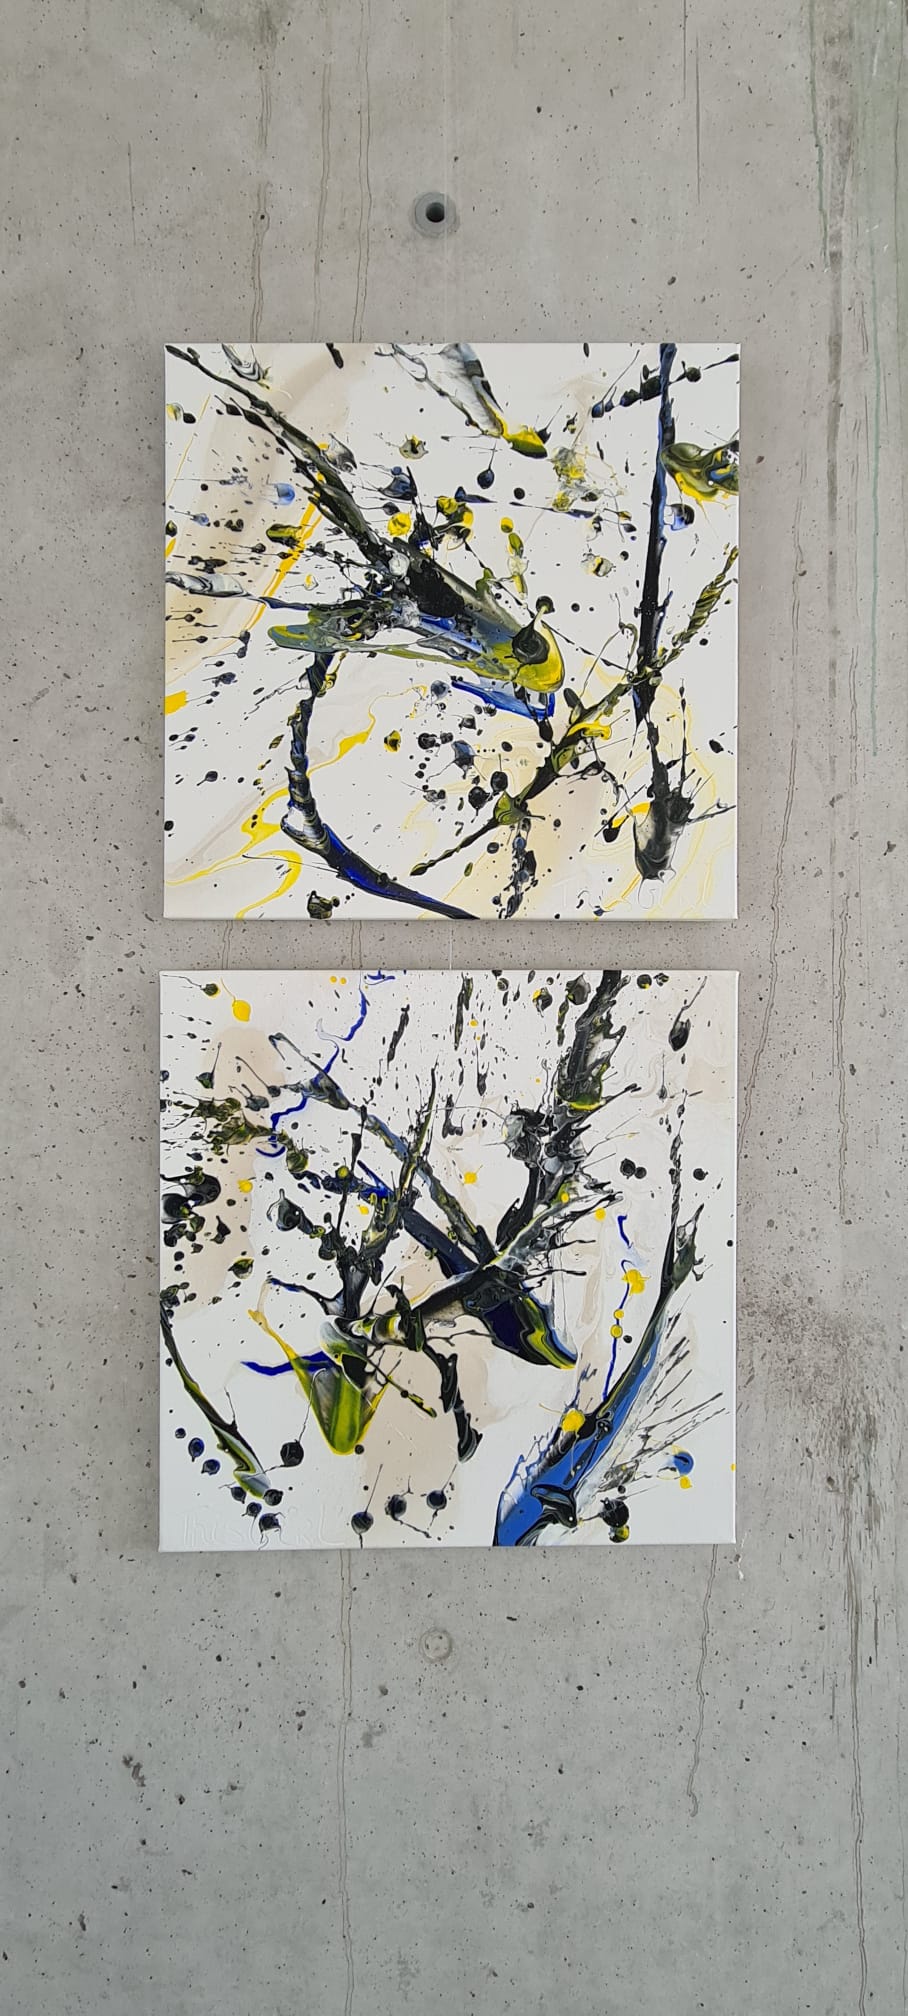 We are a pair I&II – Resin with acrylics on canvas – 60x60cm – 1200 euro each – SOLD